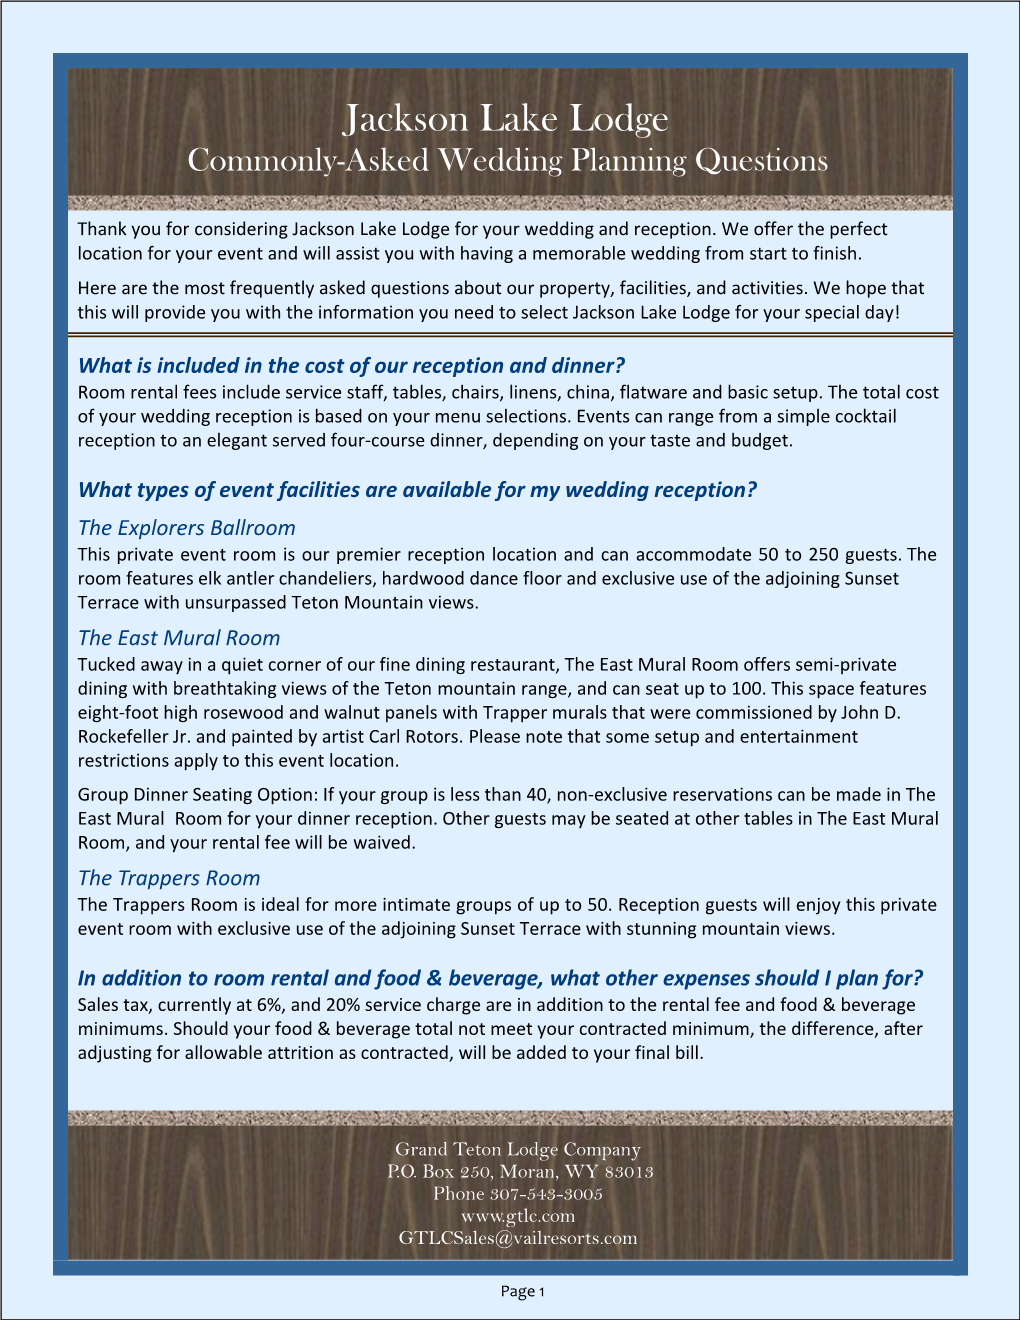 Jackson Lake Lodge Commonly-Asked Wedding Planning Questions